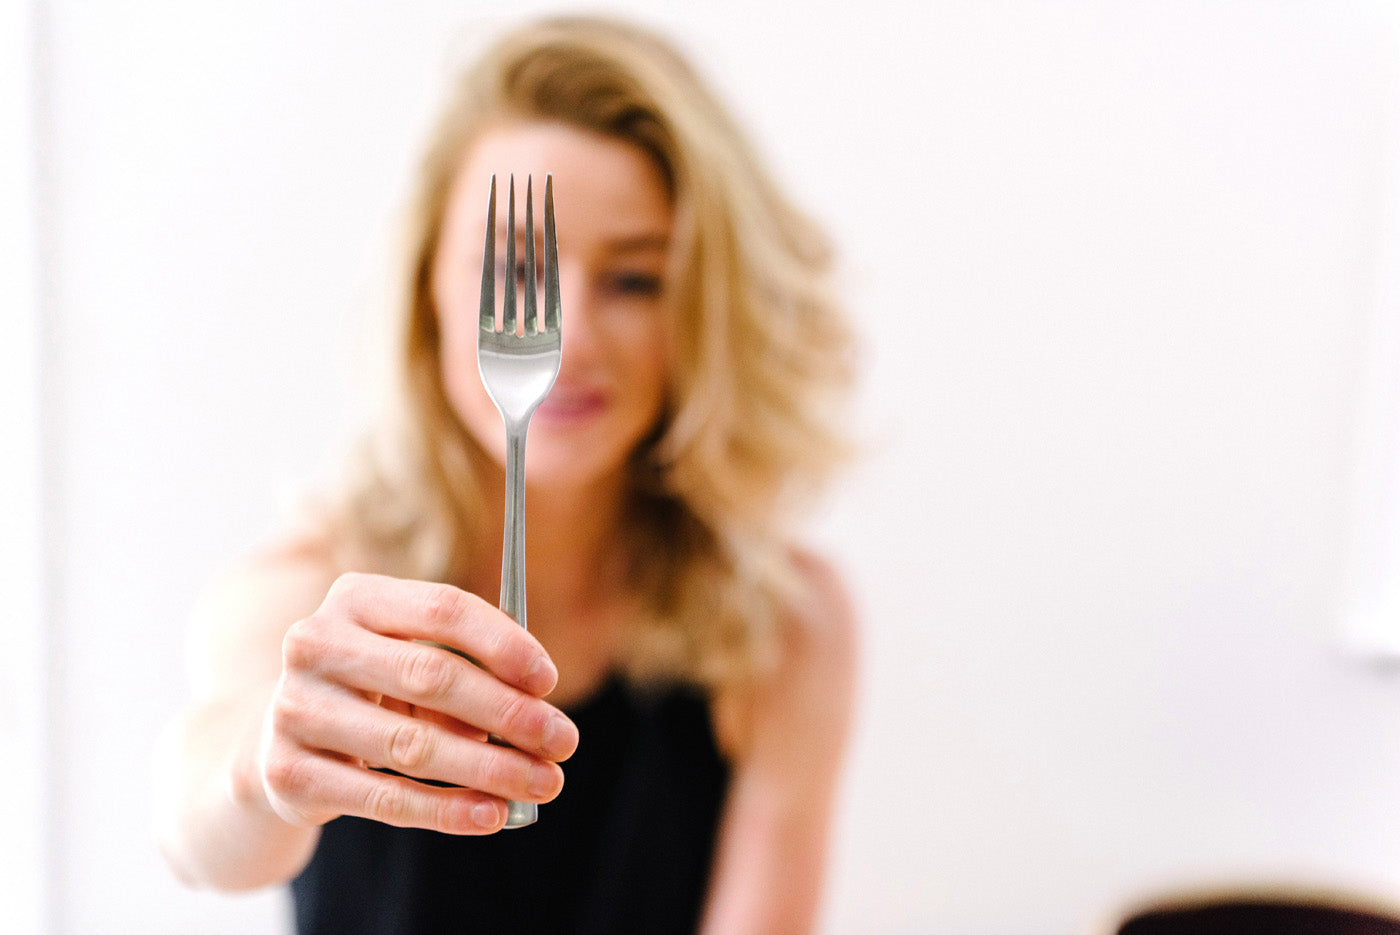 Intuitive eating and why it might be right for you